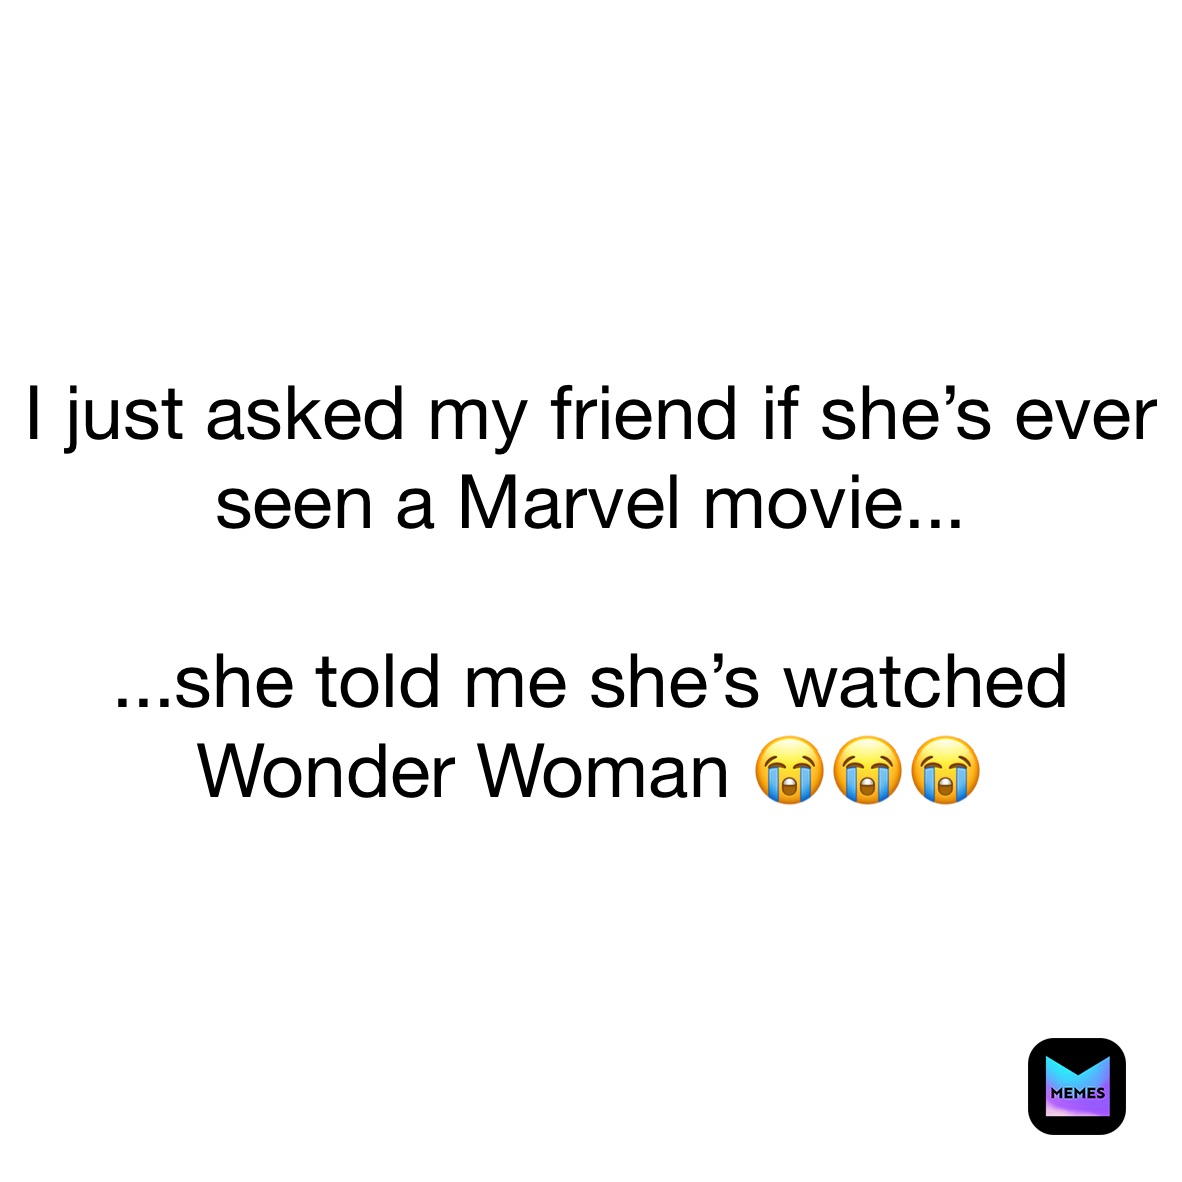 I just asked my friend if she’s ever seen a Marvel movie...

...she told me she’s watched Wonder Woman 😭😭😭